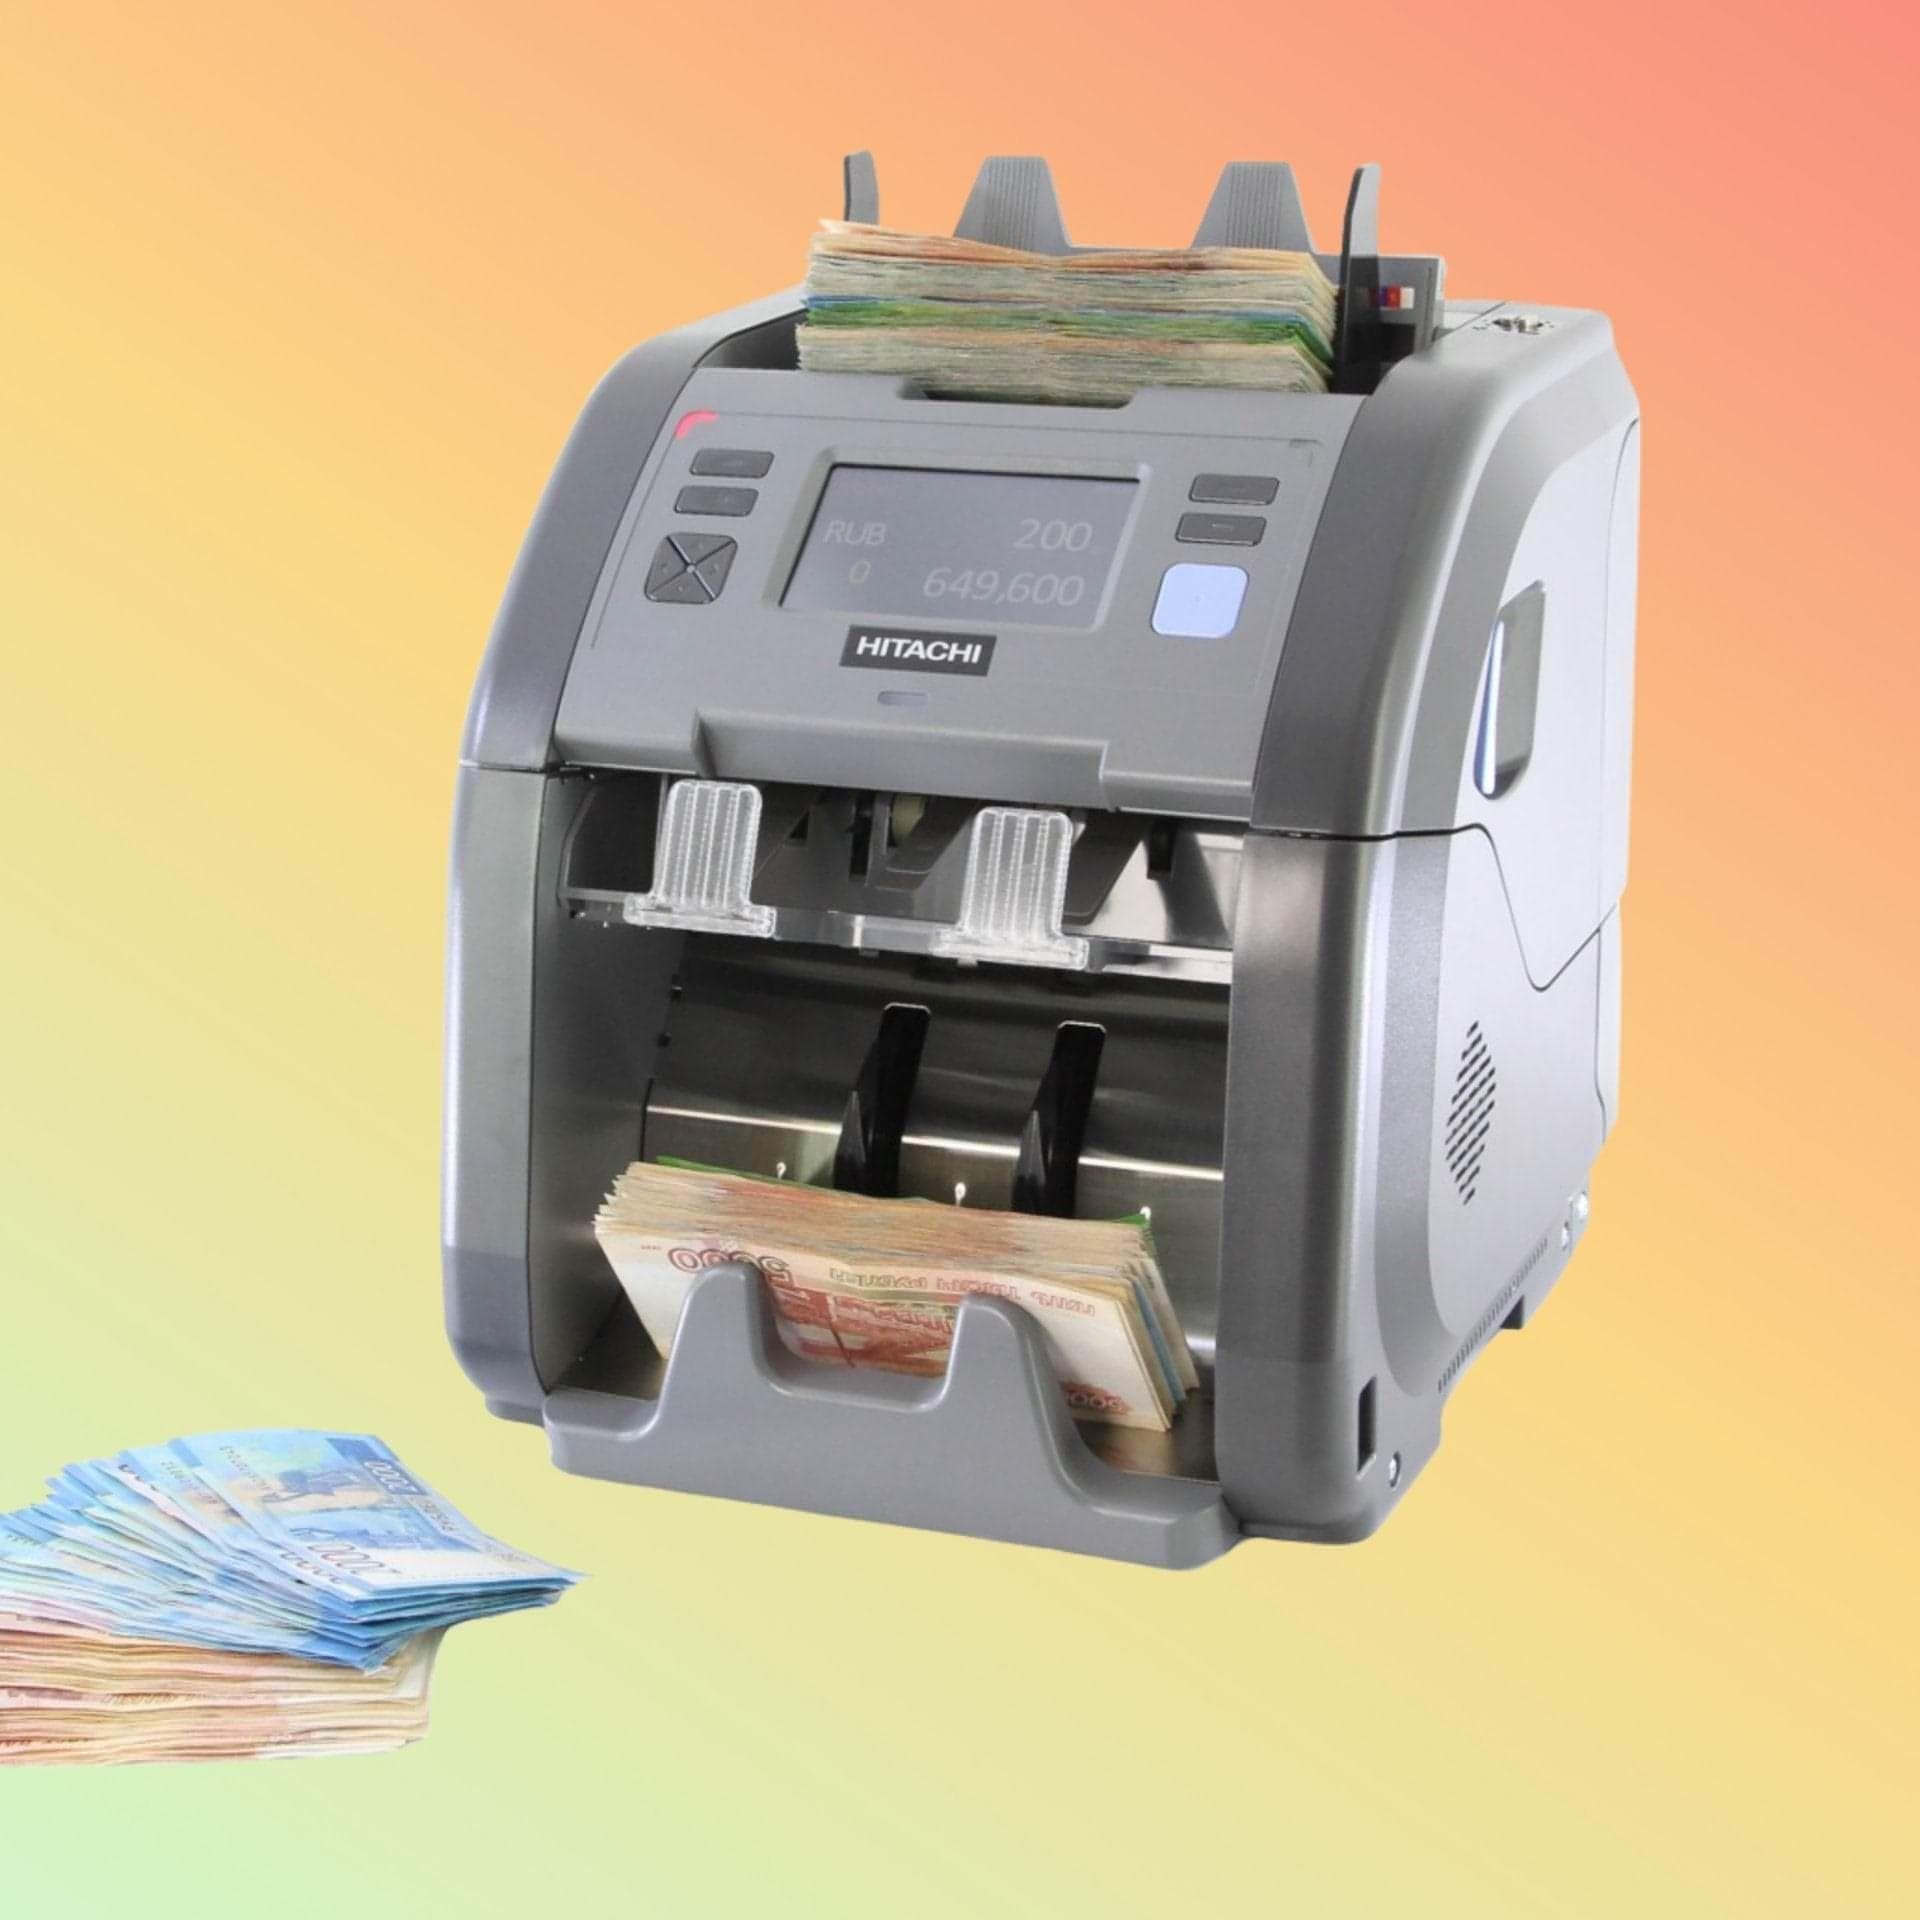 "Compact Hitachi iHunter iH-110 with OCR and MICR technology for precise note sorting and value counting in diverse industries."